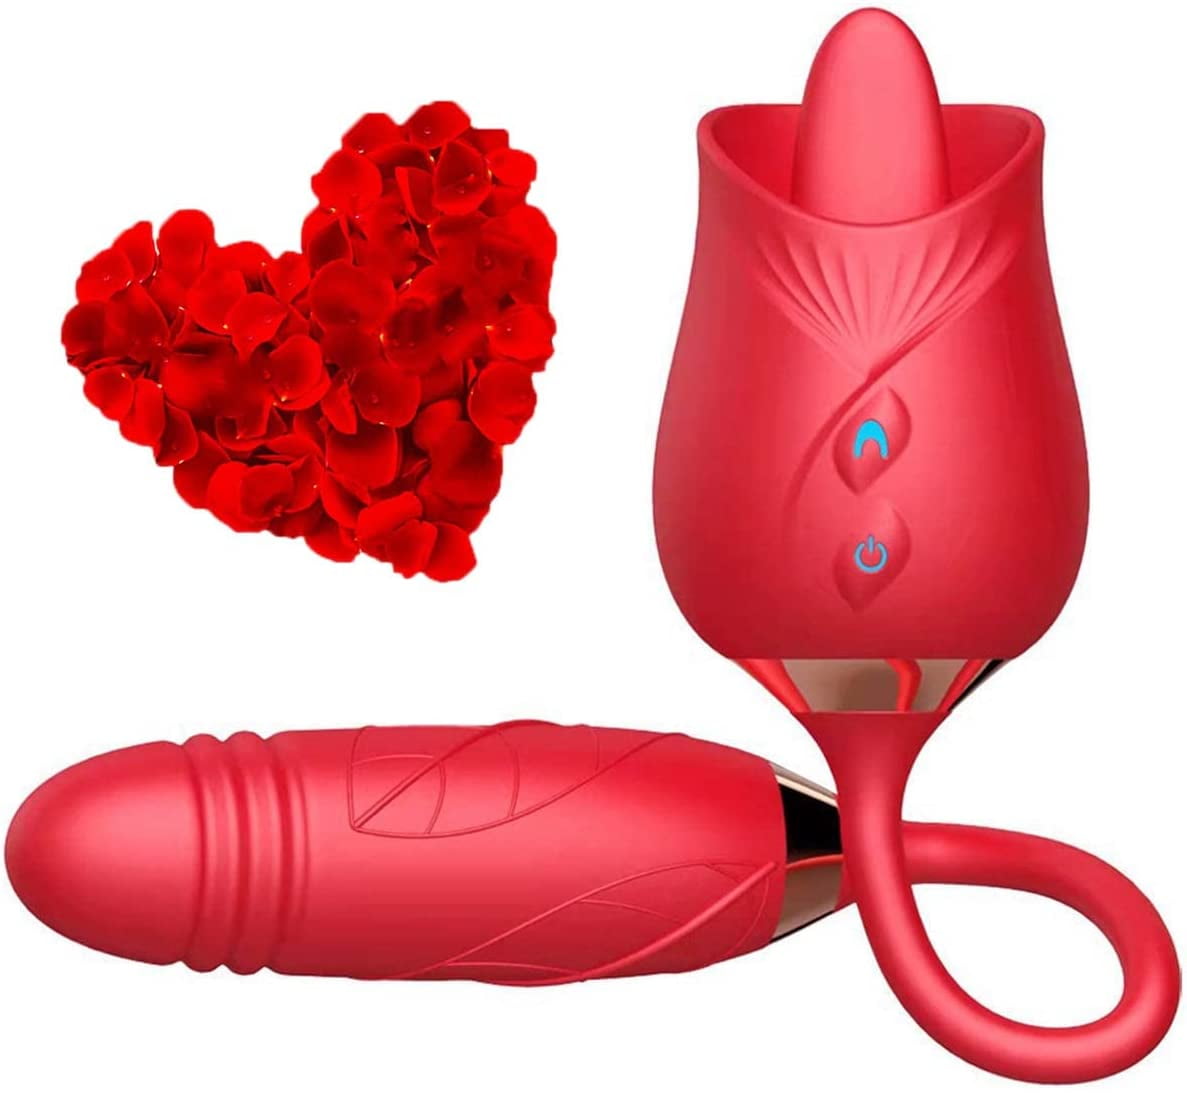 G Spot Adult Sensory Toys Sex Toy for Women Pleasure Adult Toys hq nude photo